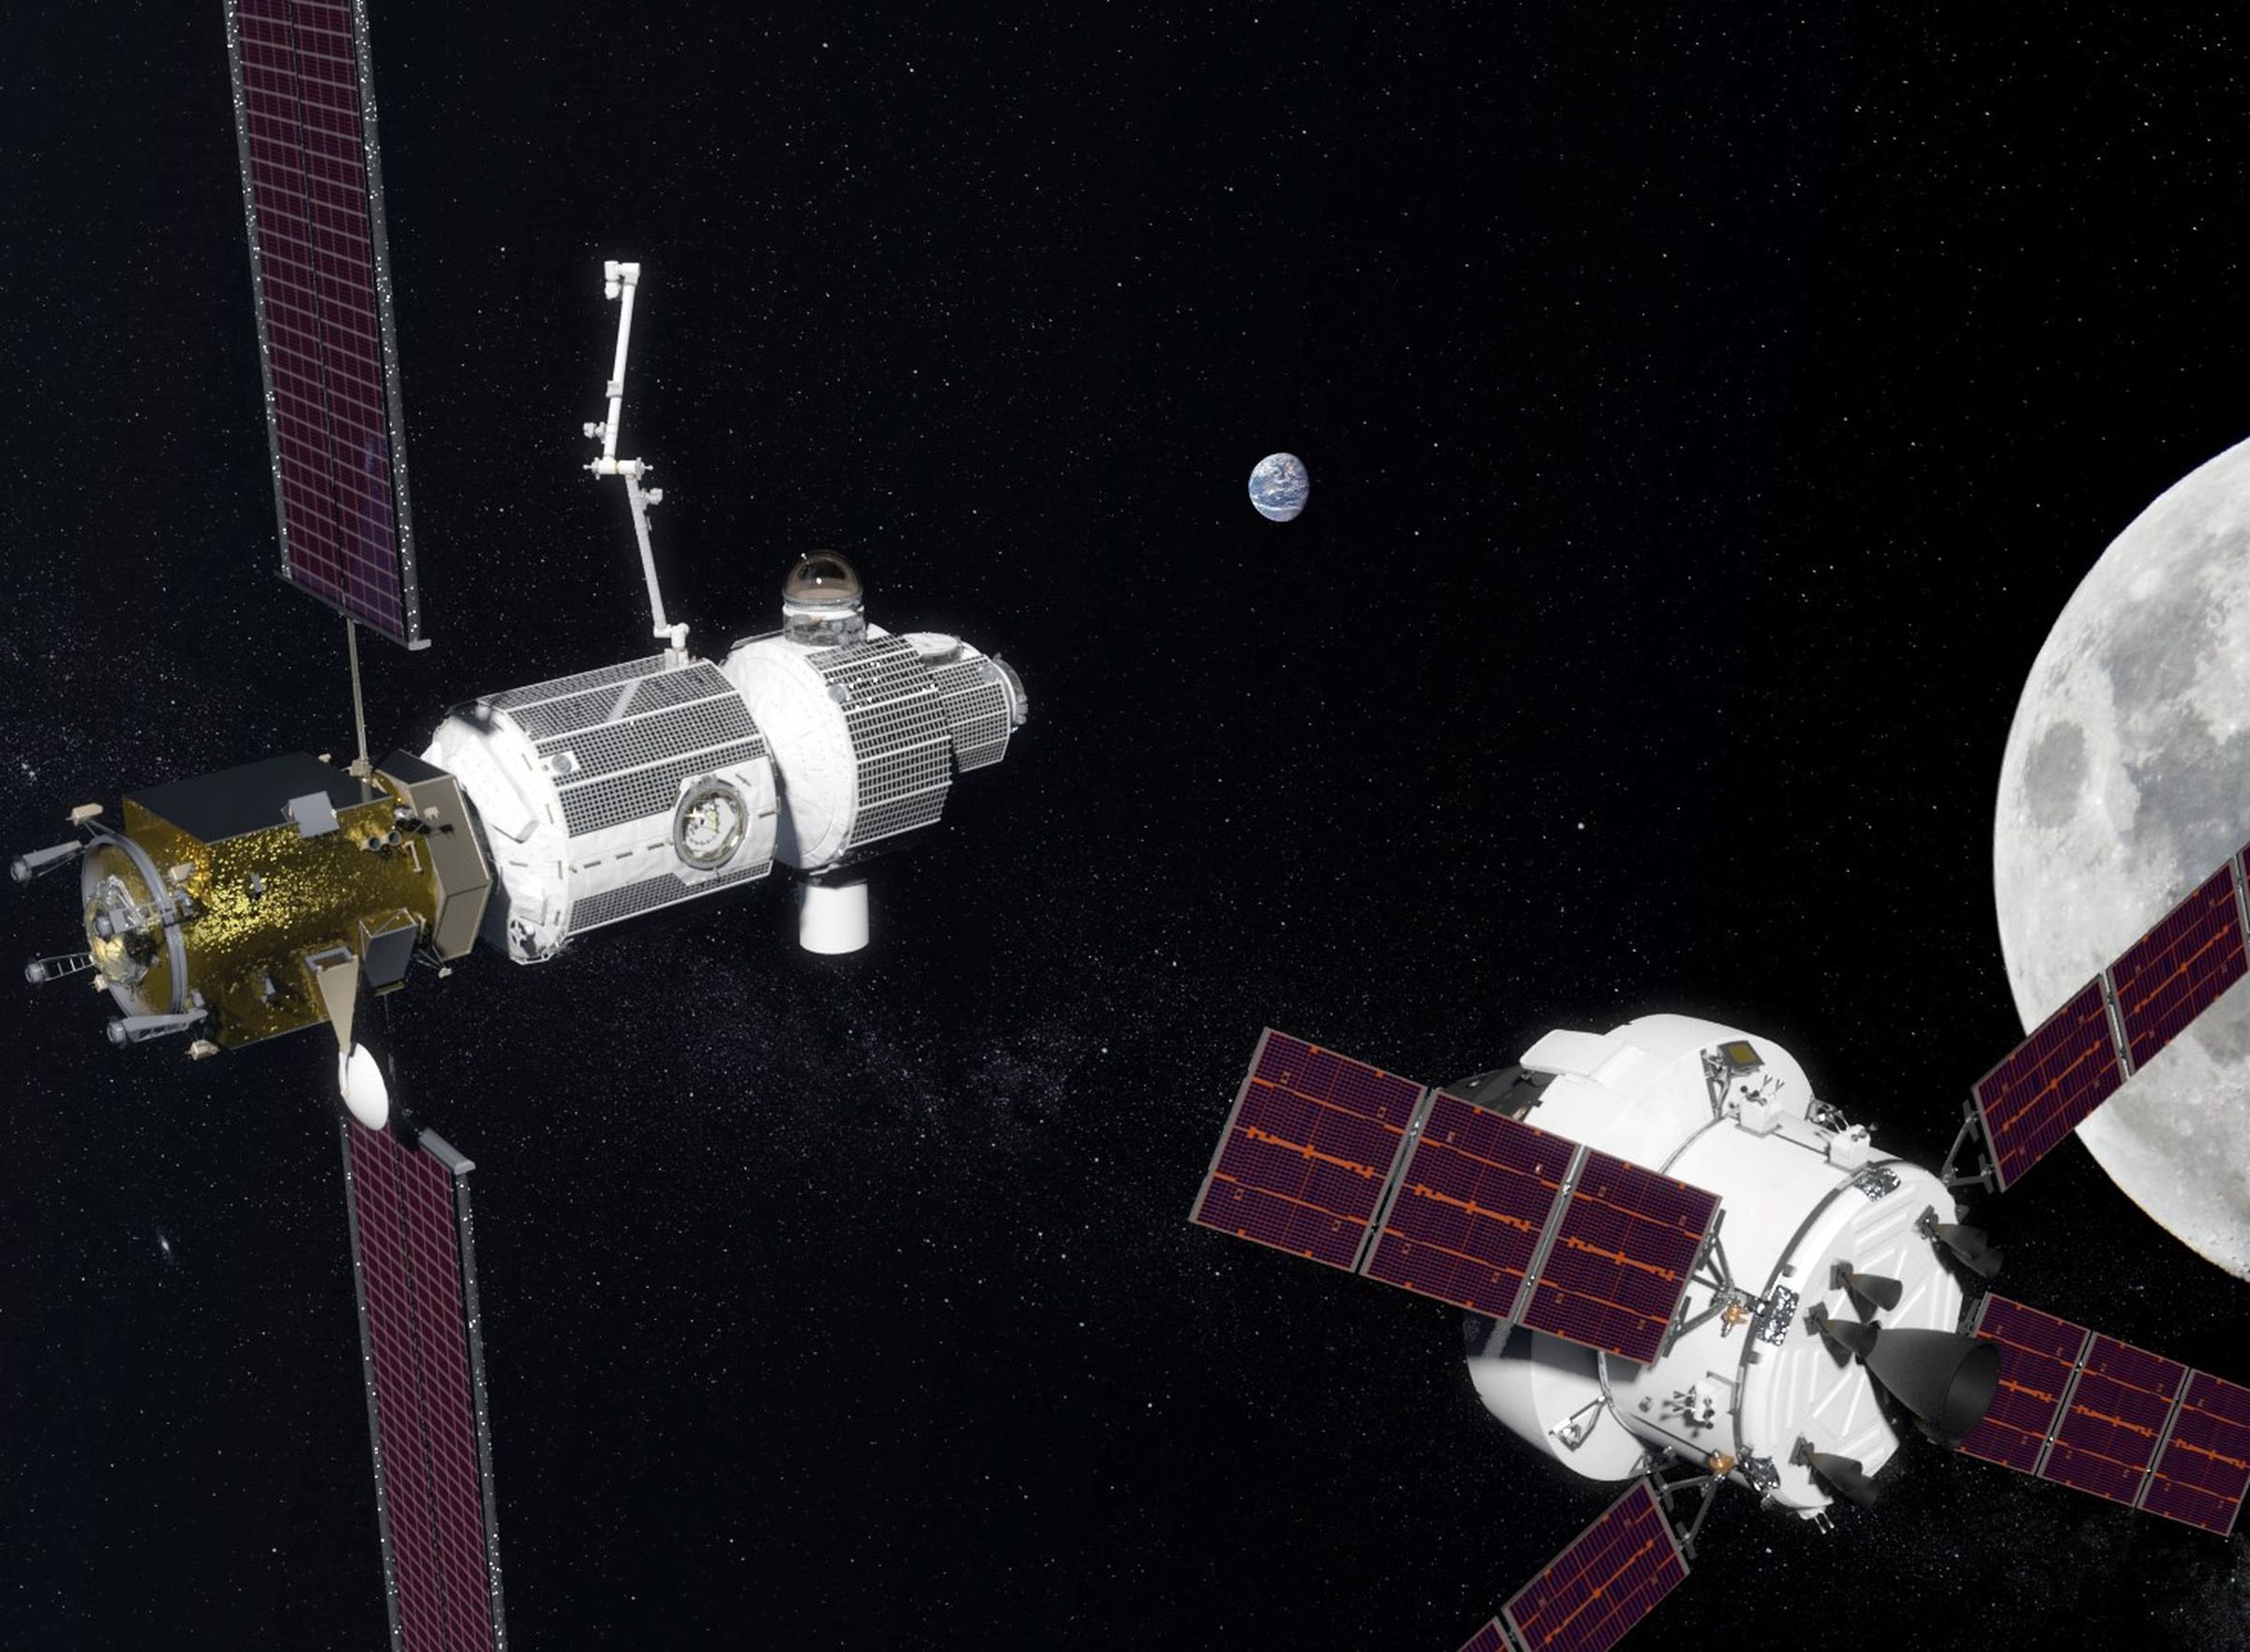 A rendering of what NASA’s outpost near the Moon could look like.